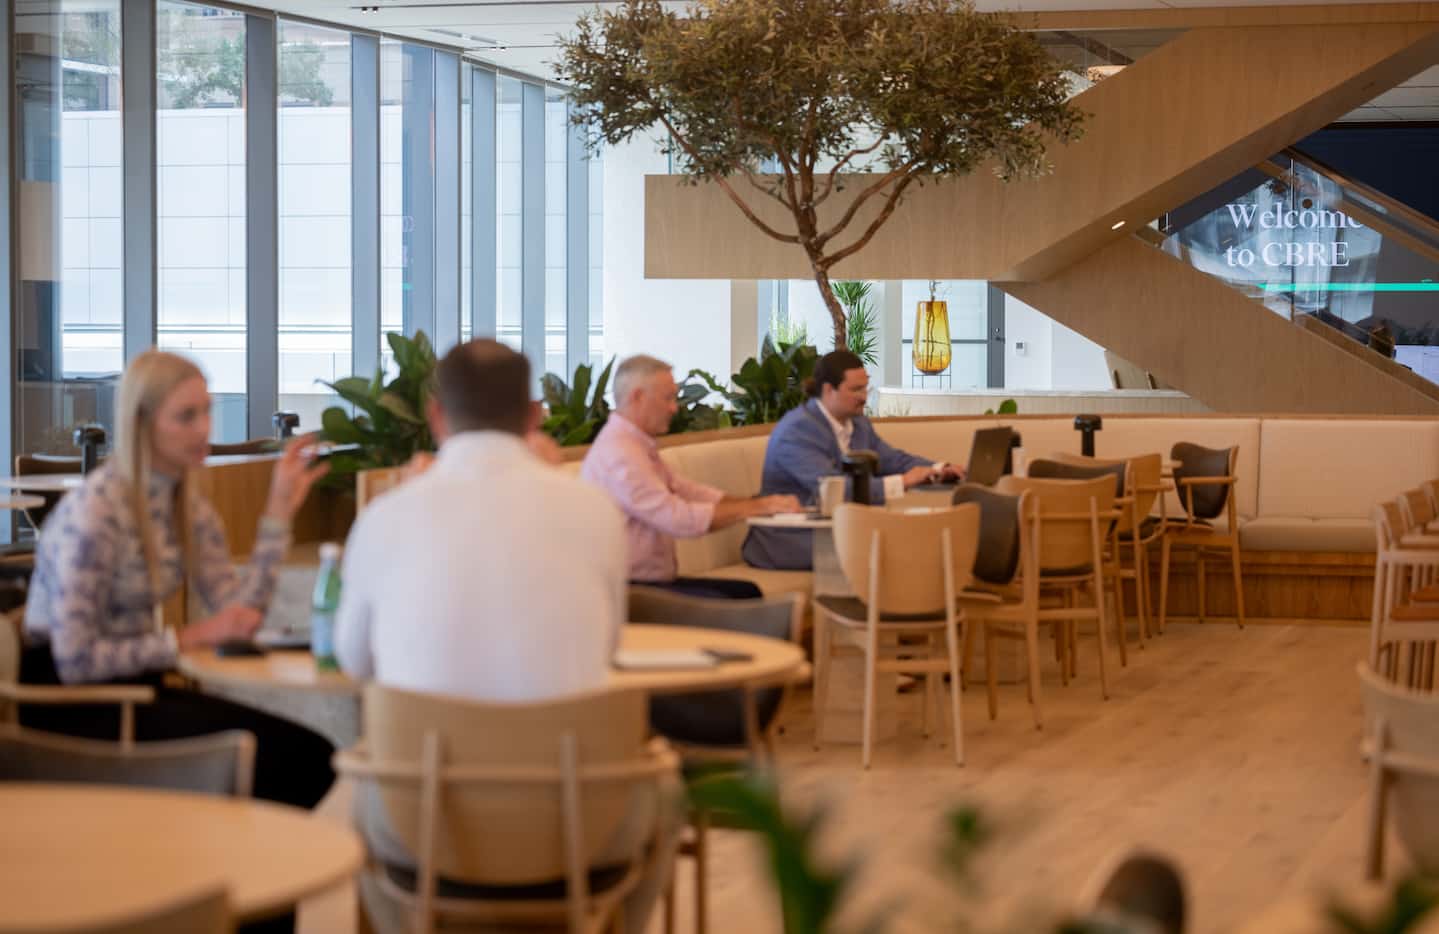 Visitors to CBRE's new global headquarters are met by a reception desk and the company's new...